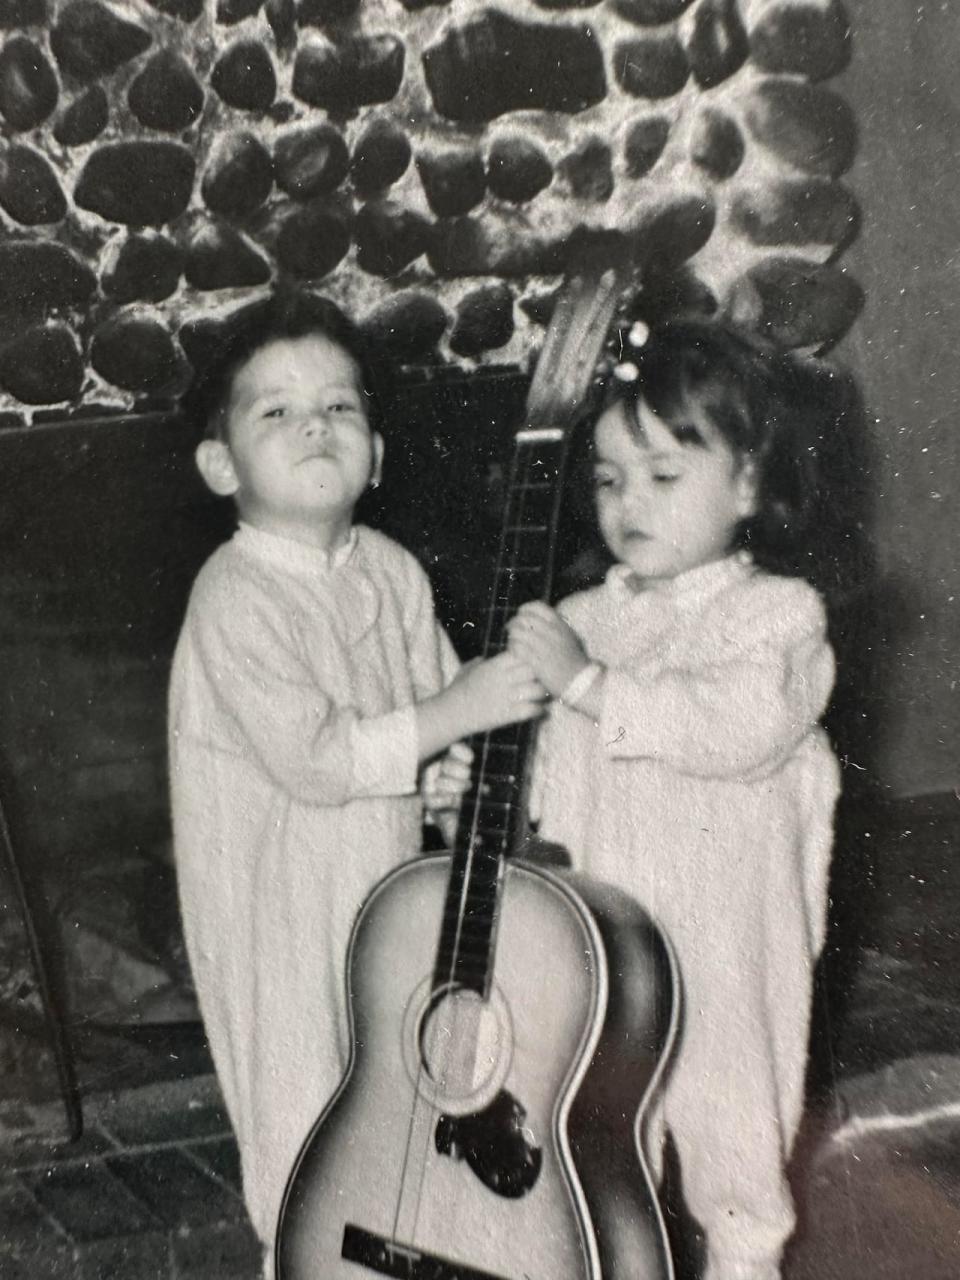 Kym Gouchie as a young girl with a guitar, and her brother, Buddy Gouchie.